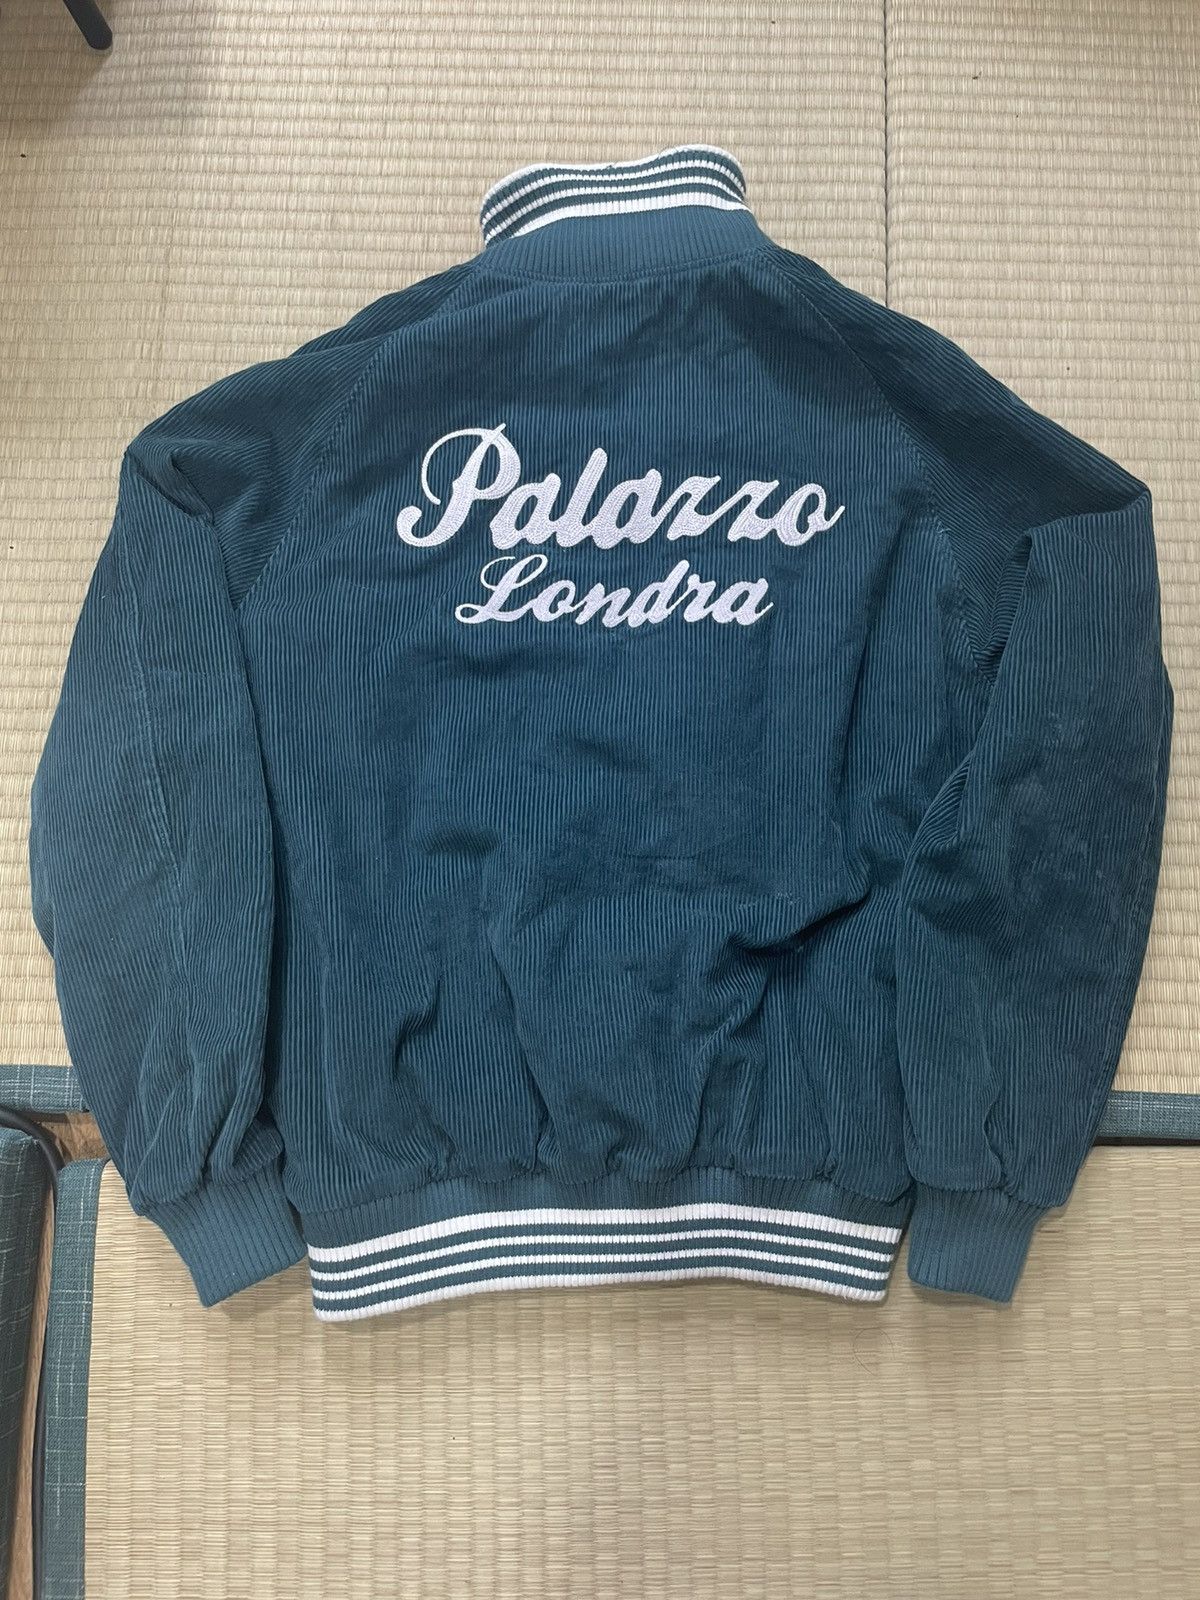 Men's Palace Bombers | Grailed